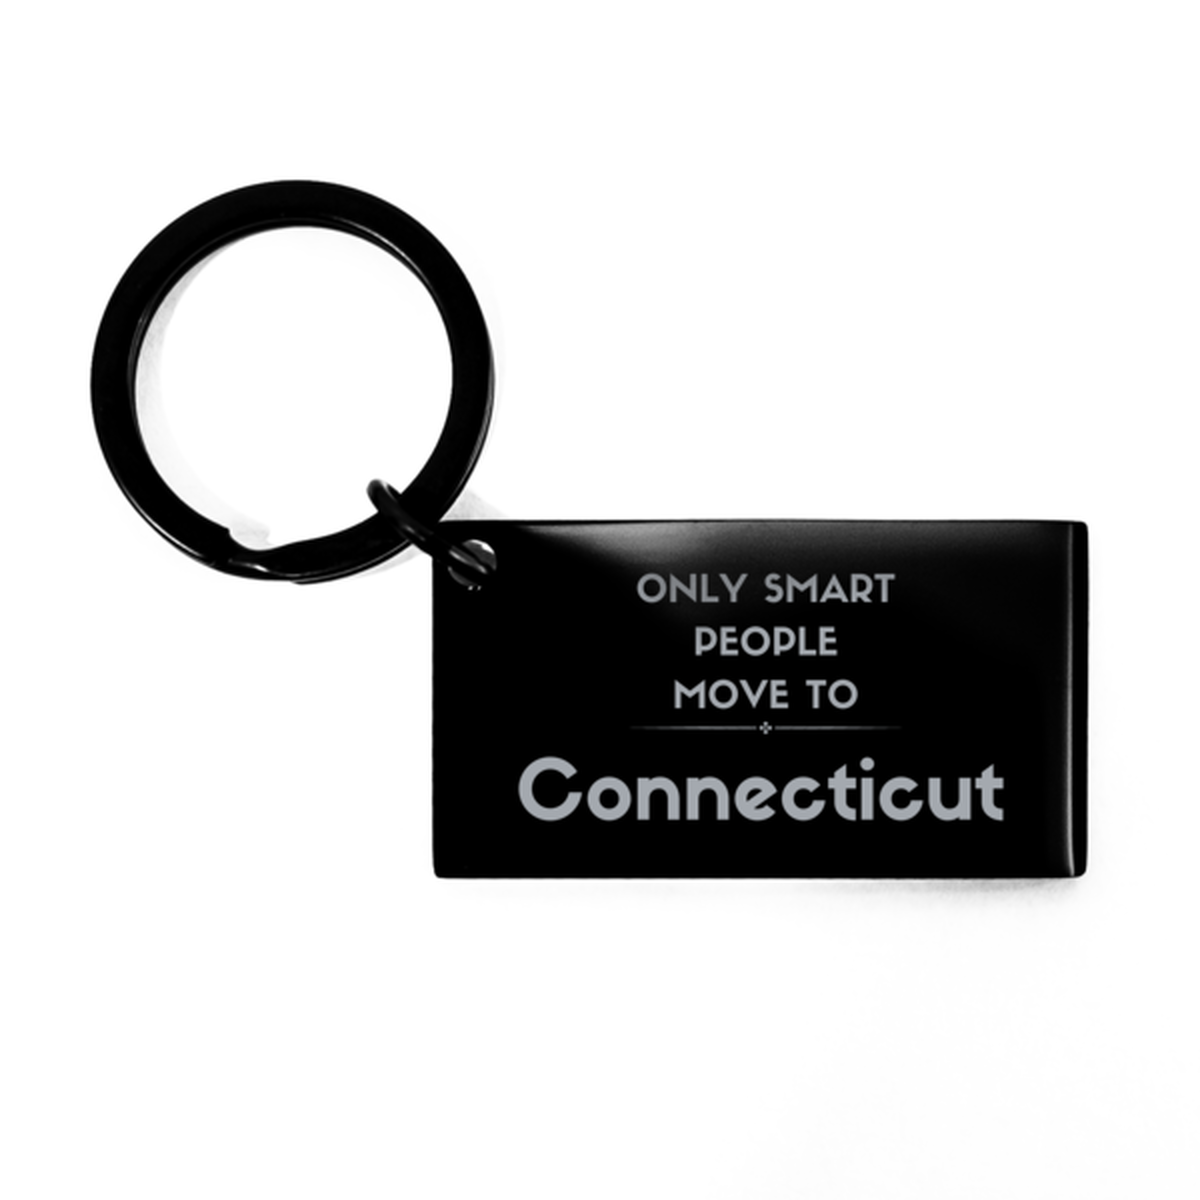 Only smart people move to Connecticut Keychain, Gag Gifts For Connecticut, Move to Connecticut Gifts for Friends Coworker Funny Saying Quote